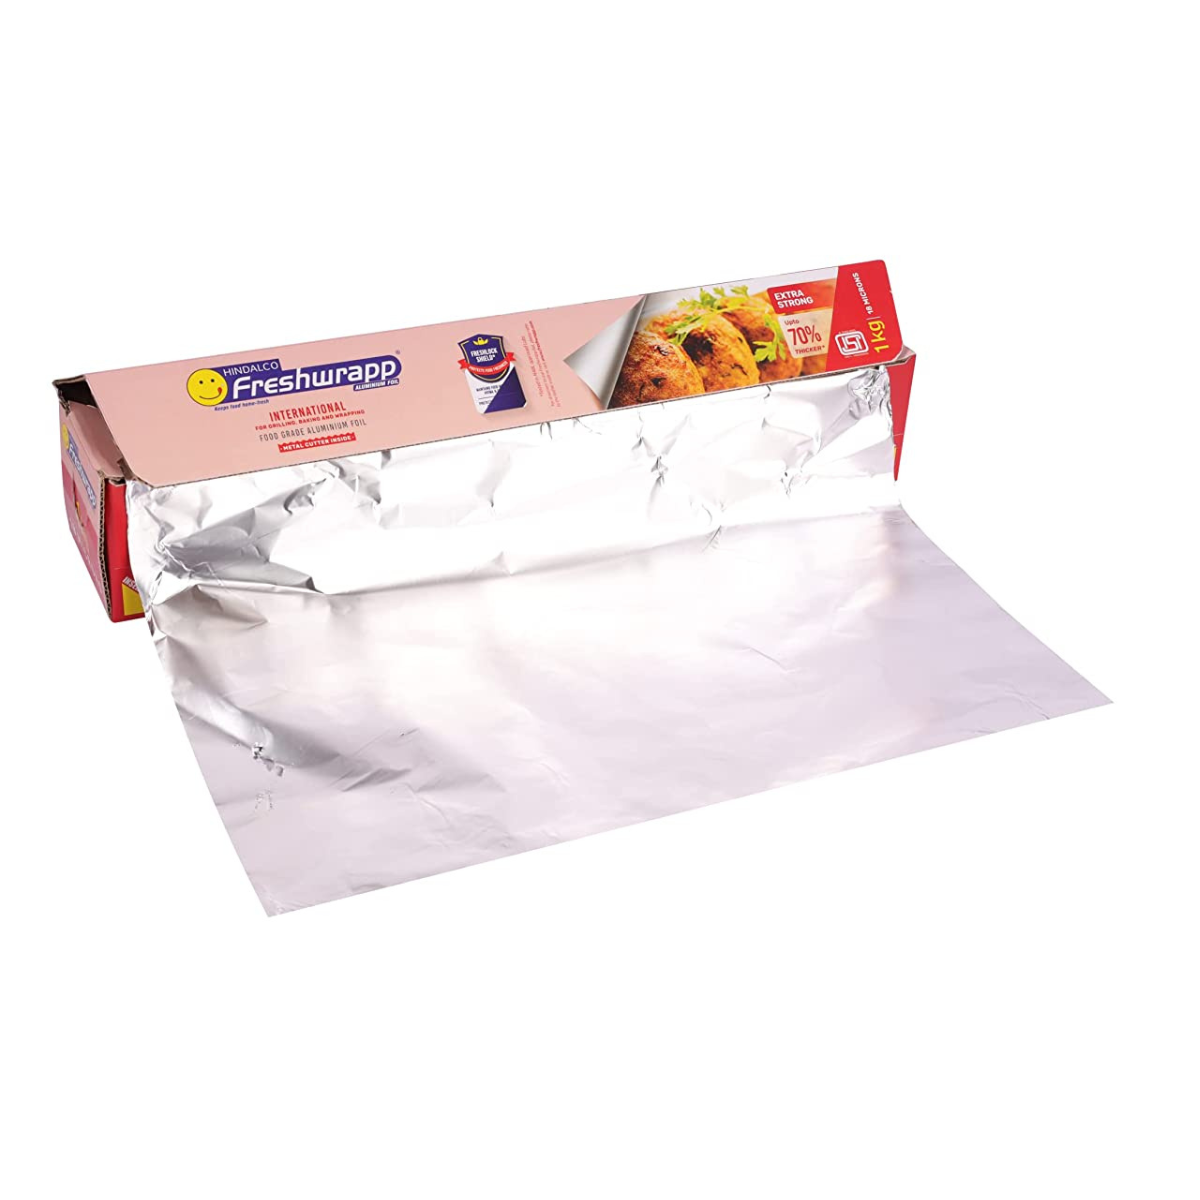 Trideva Organic 18 Micron Baking and Wrapping Foil Paper 1 Kg